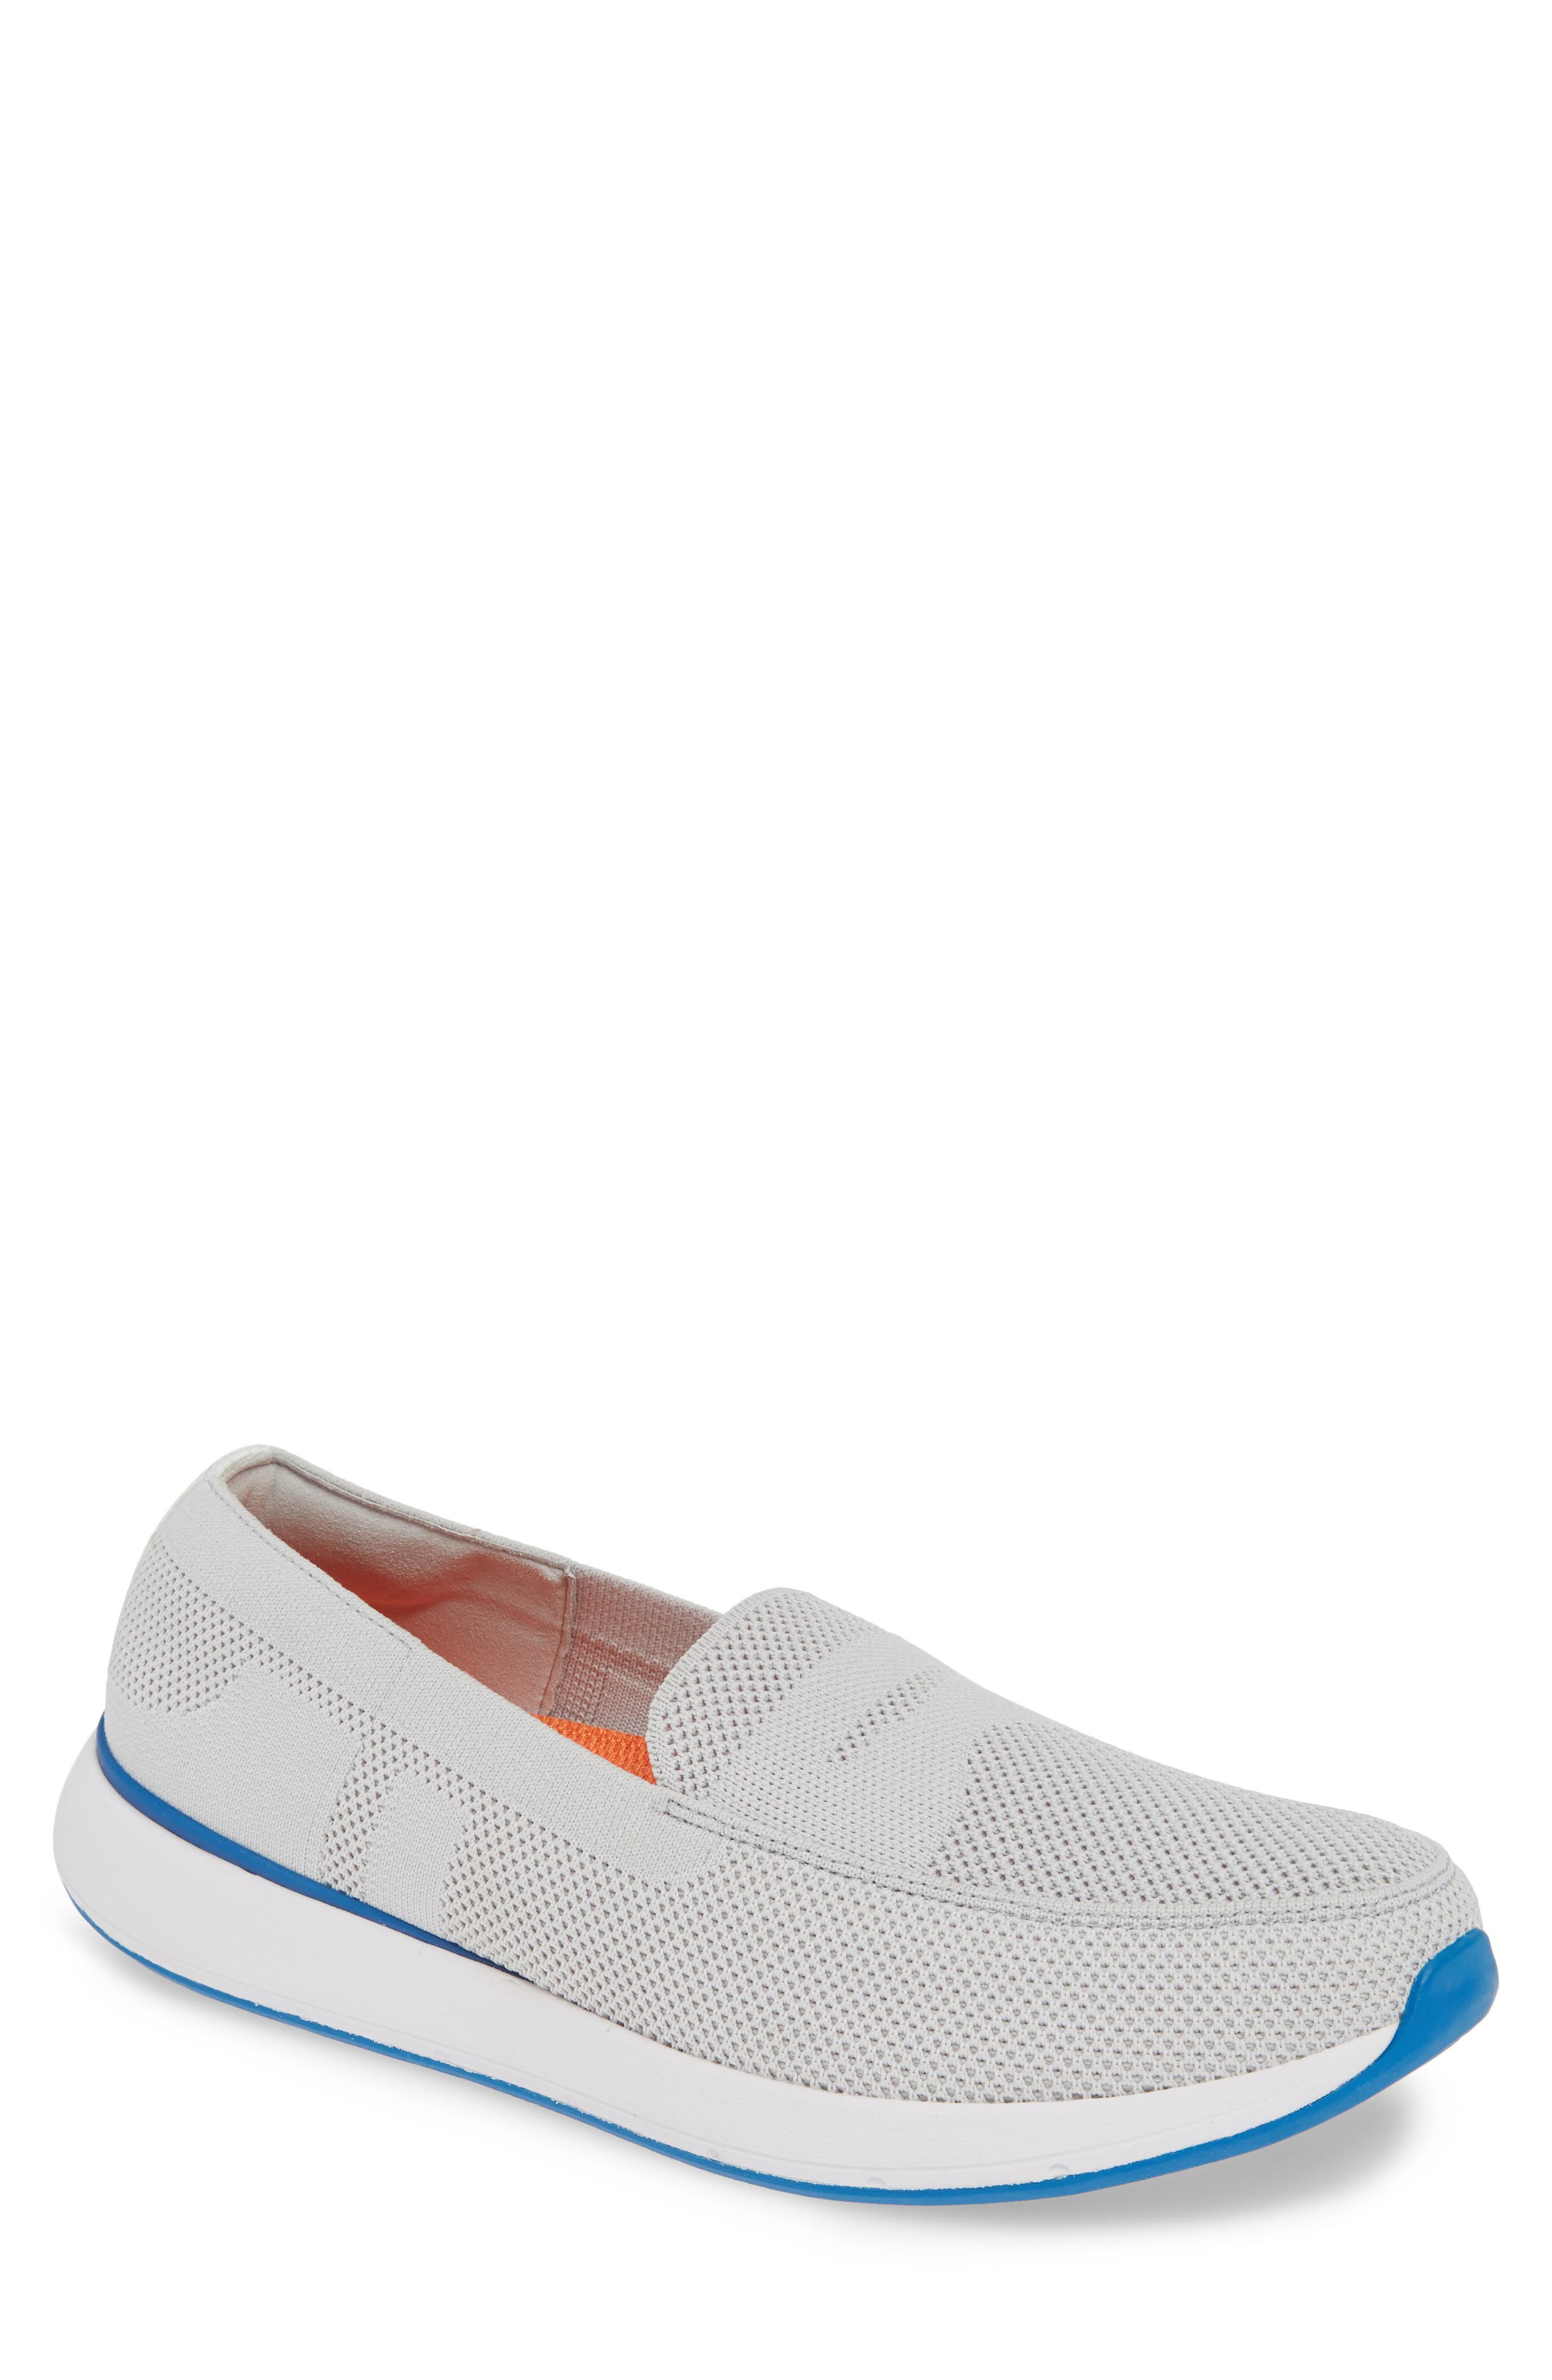 mens swims loafers sale